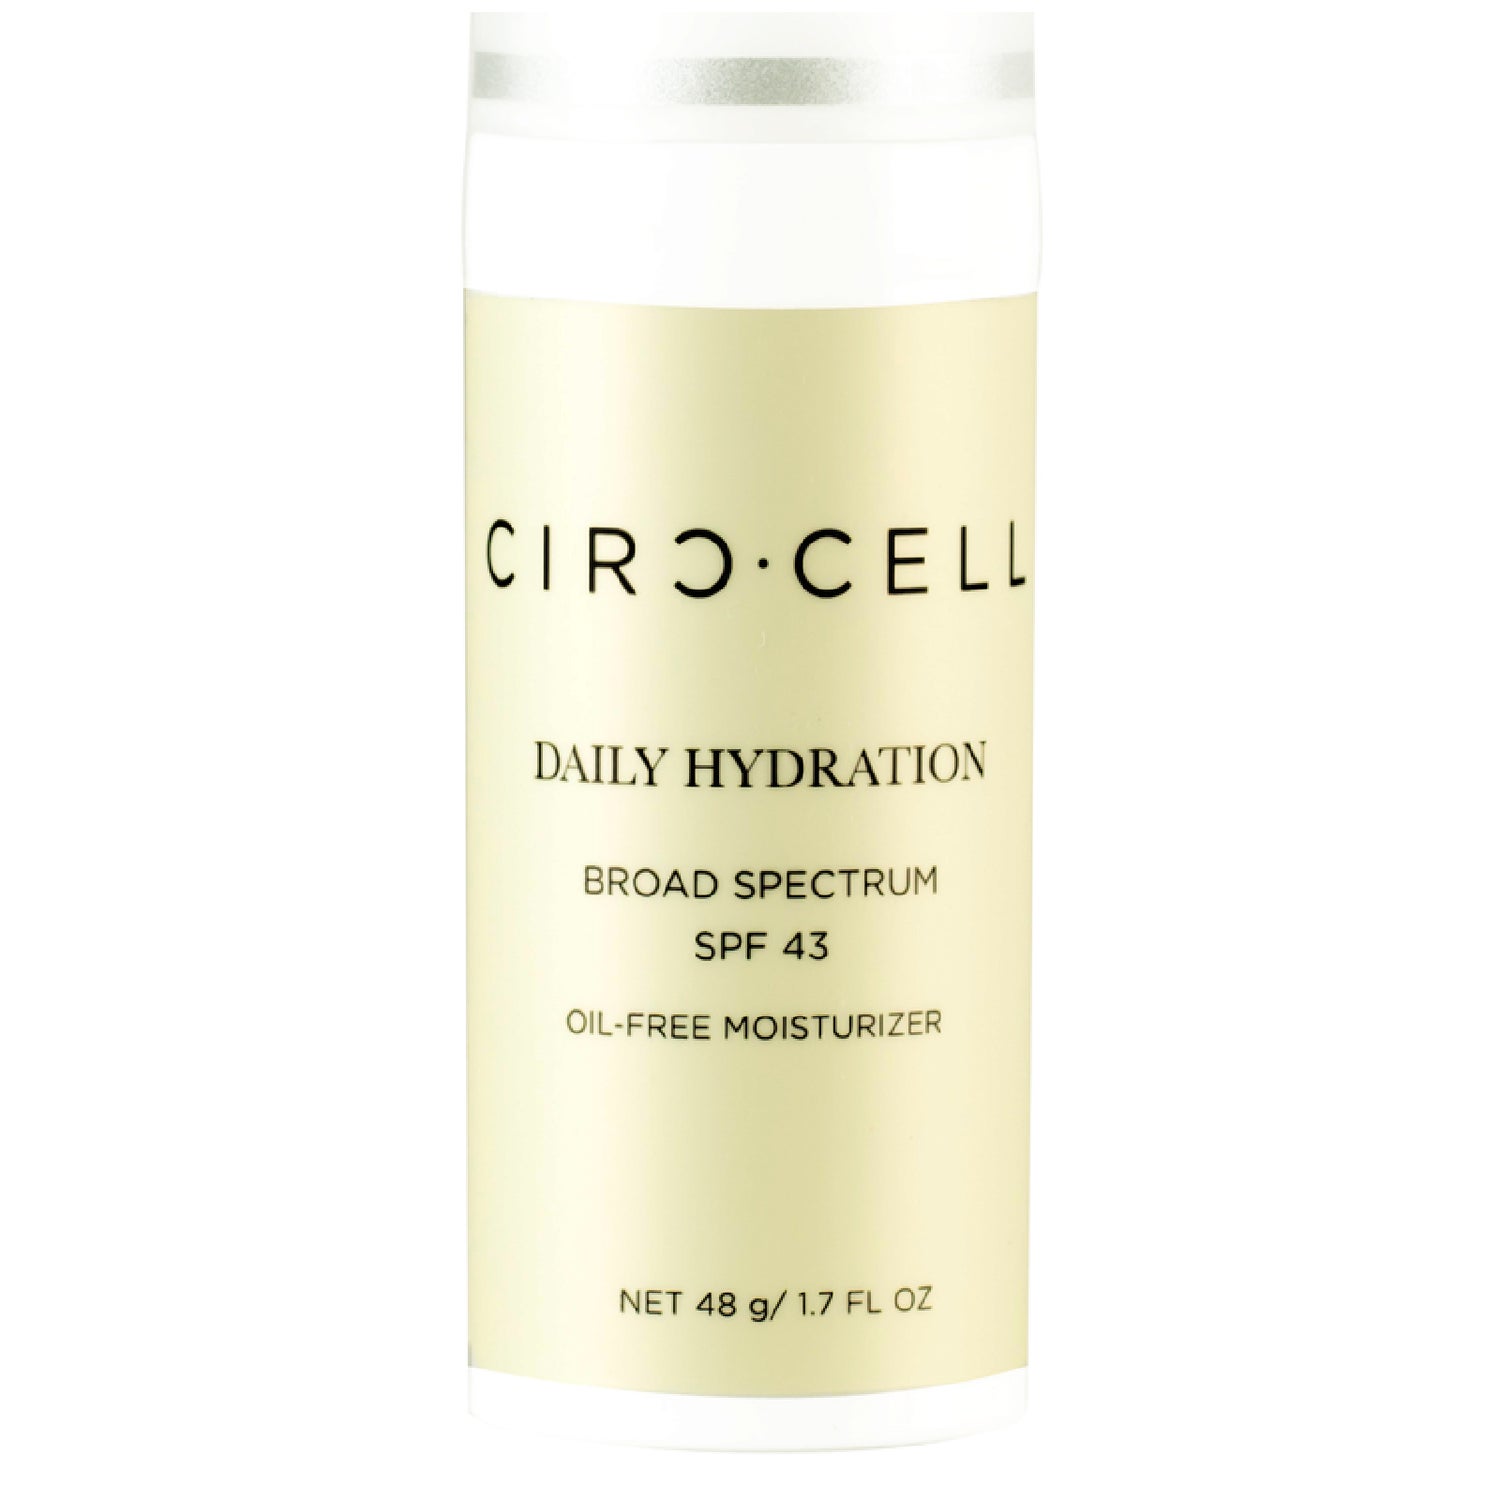 Circ-Cell Daily Hydration Broad Spectrum SPF 43 Oil-Free Moisturizer